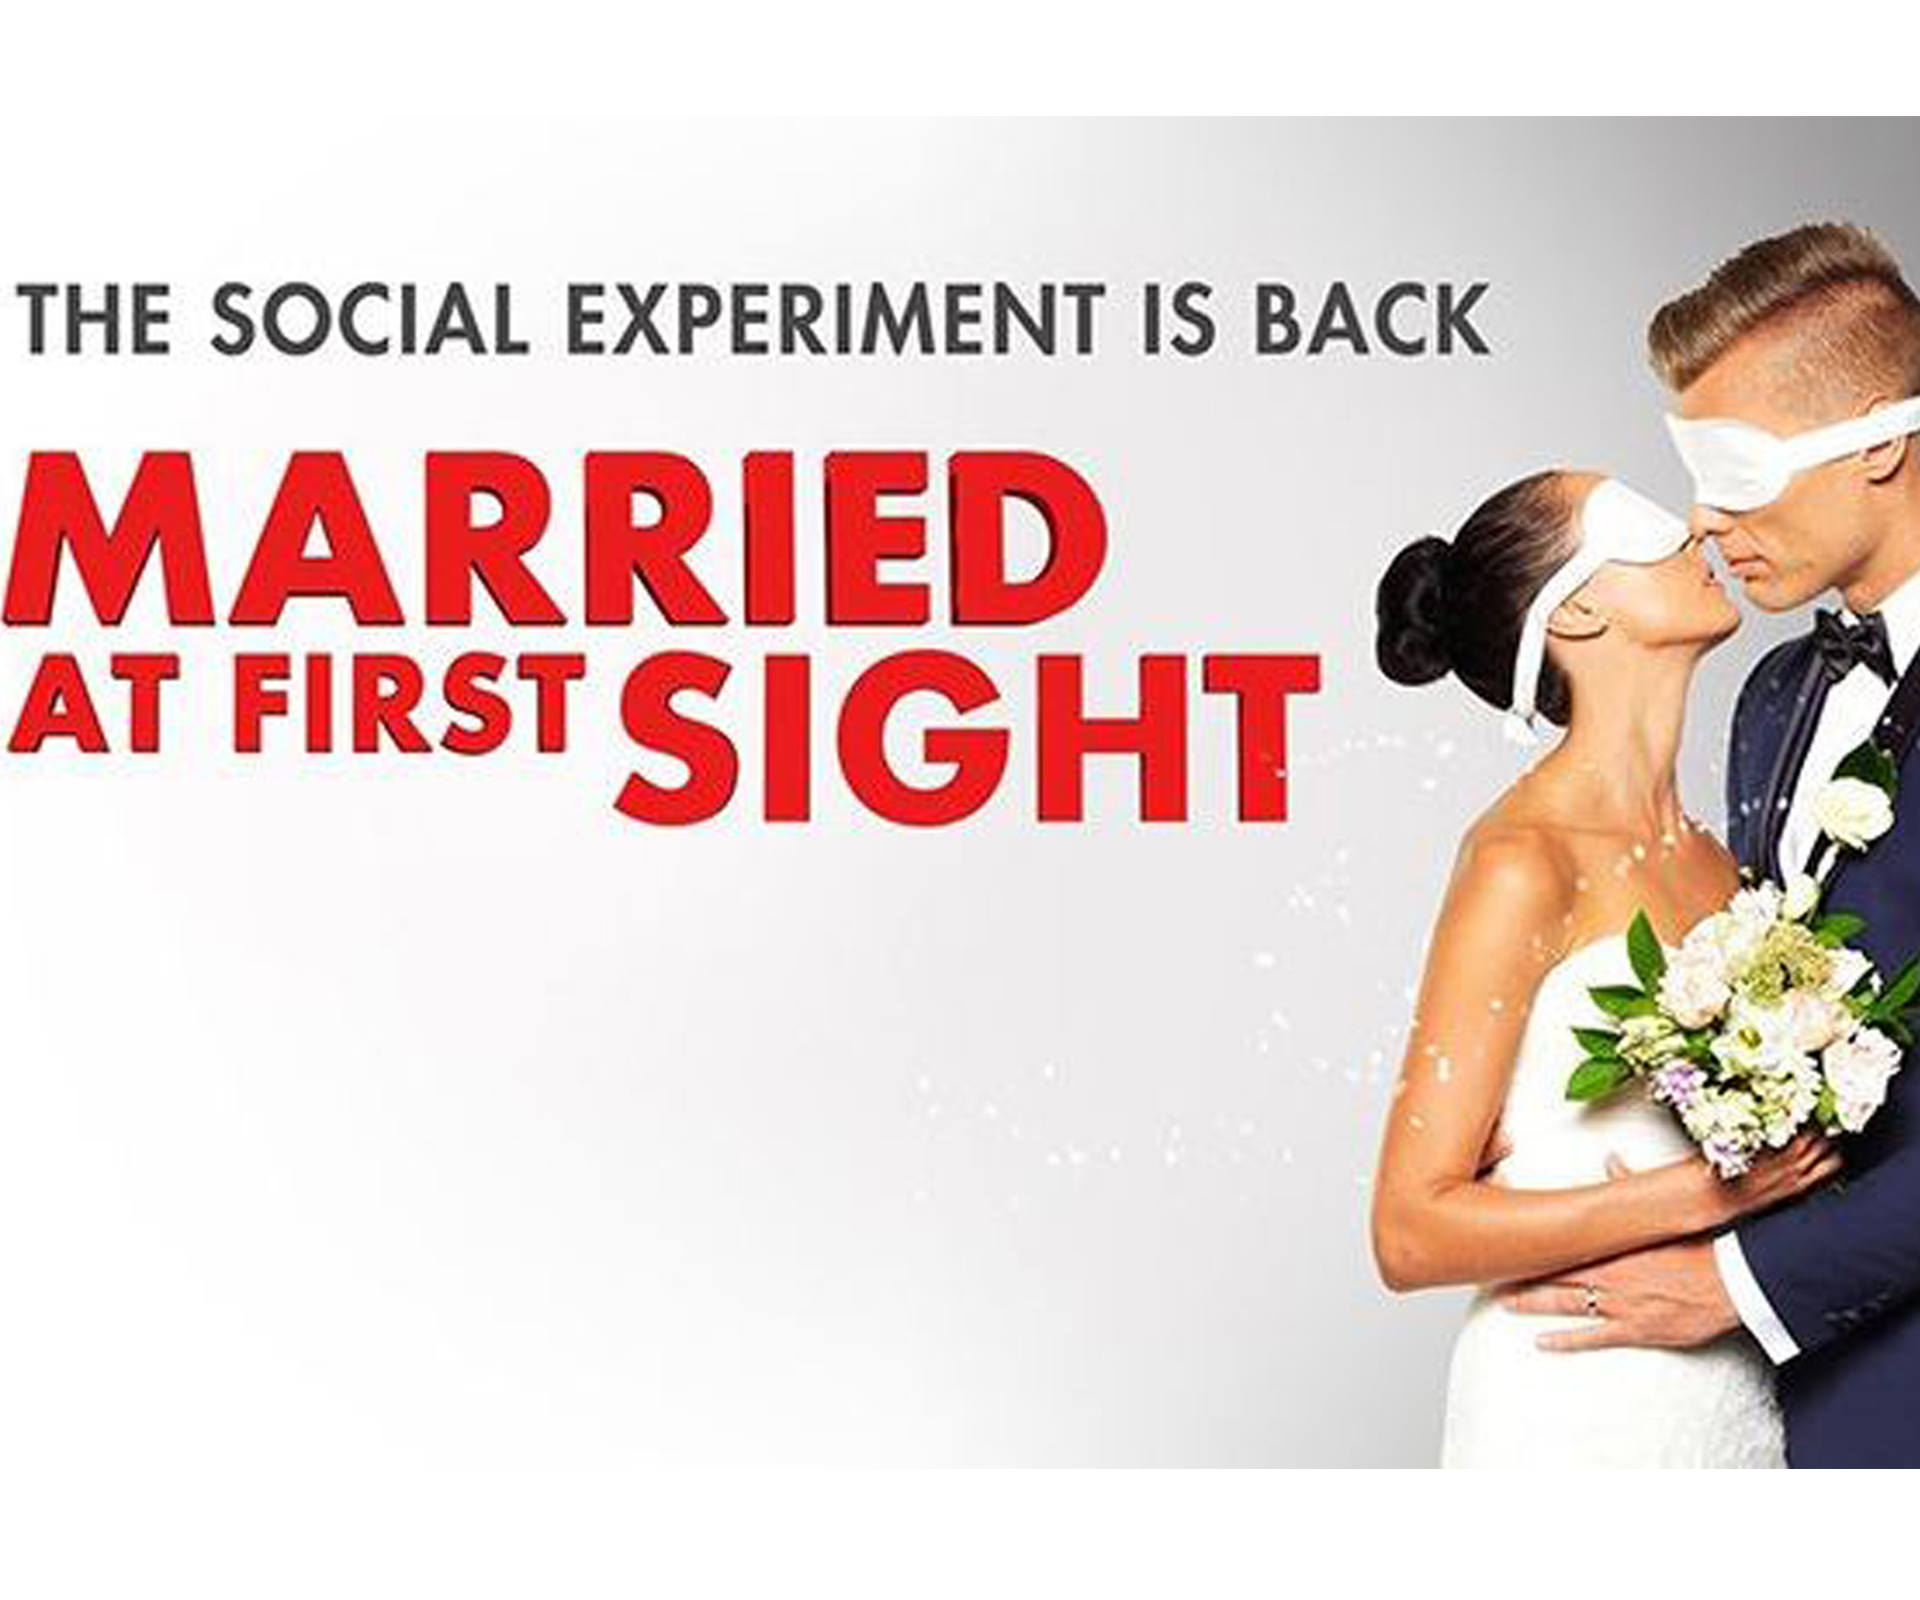 Married at first sight